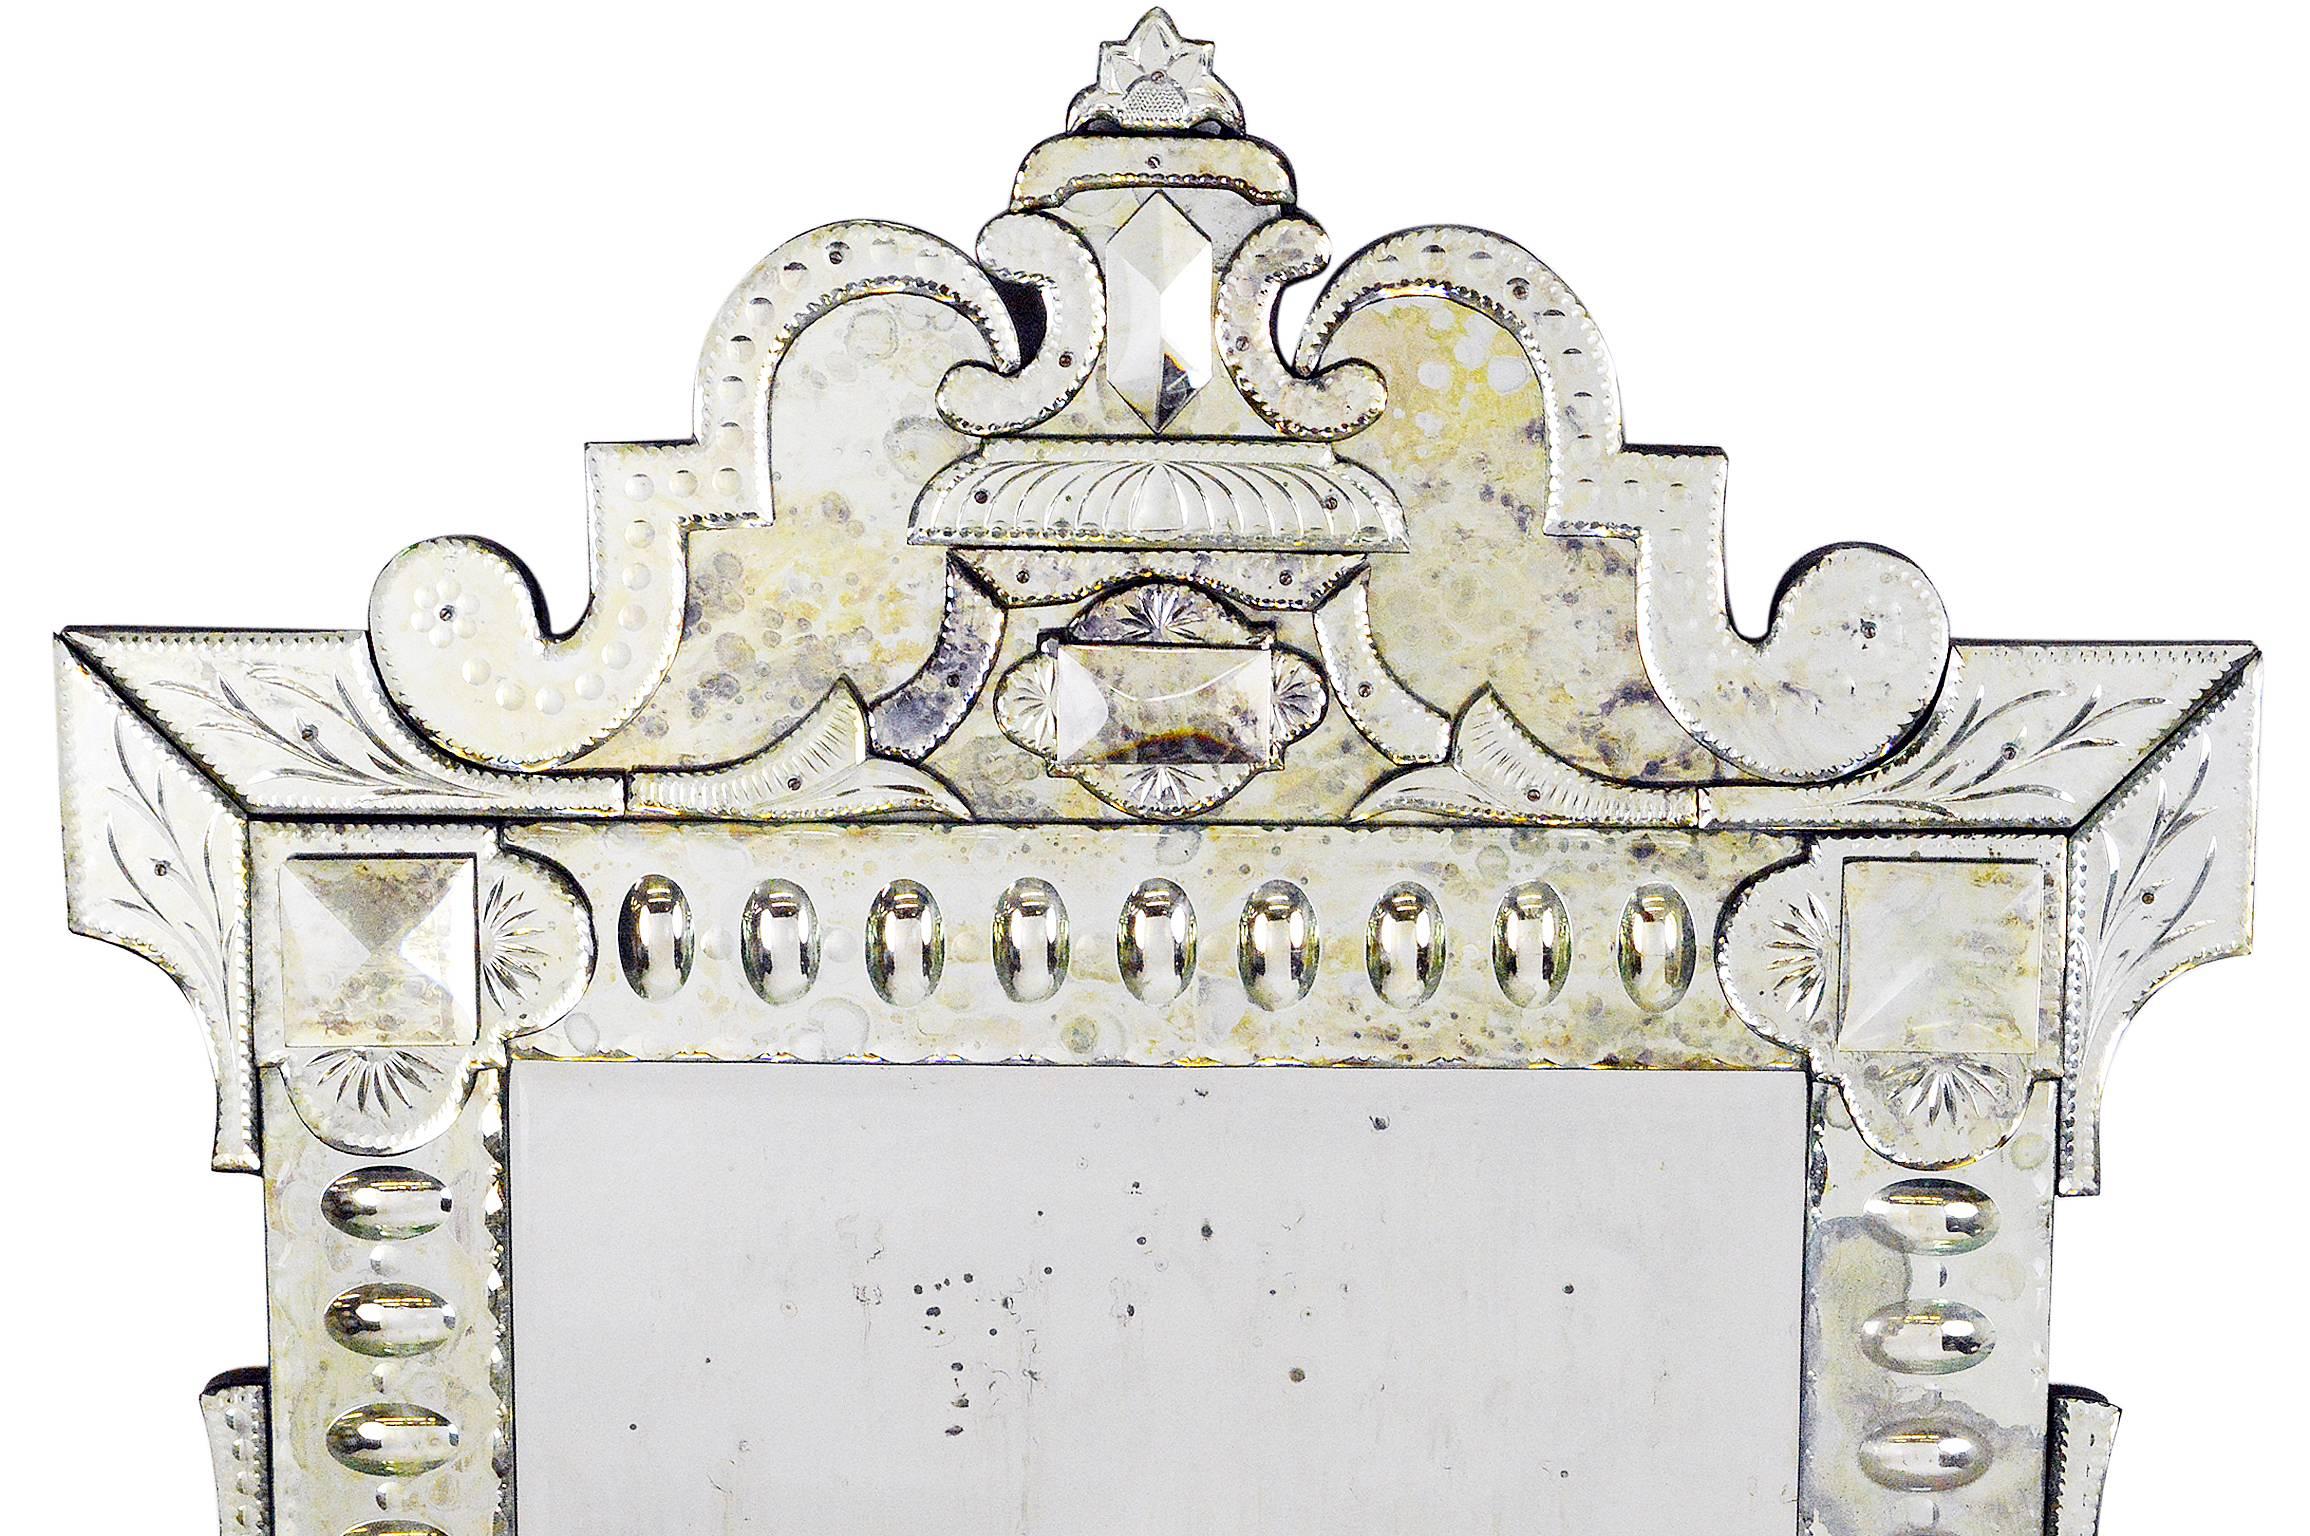 Monumental Venetian style mirror with crest top and delicate details, fabulous quality throughout.